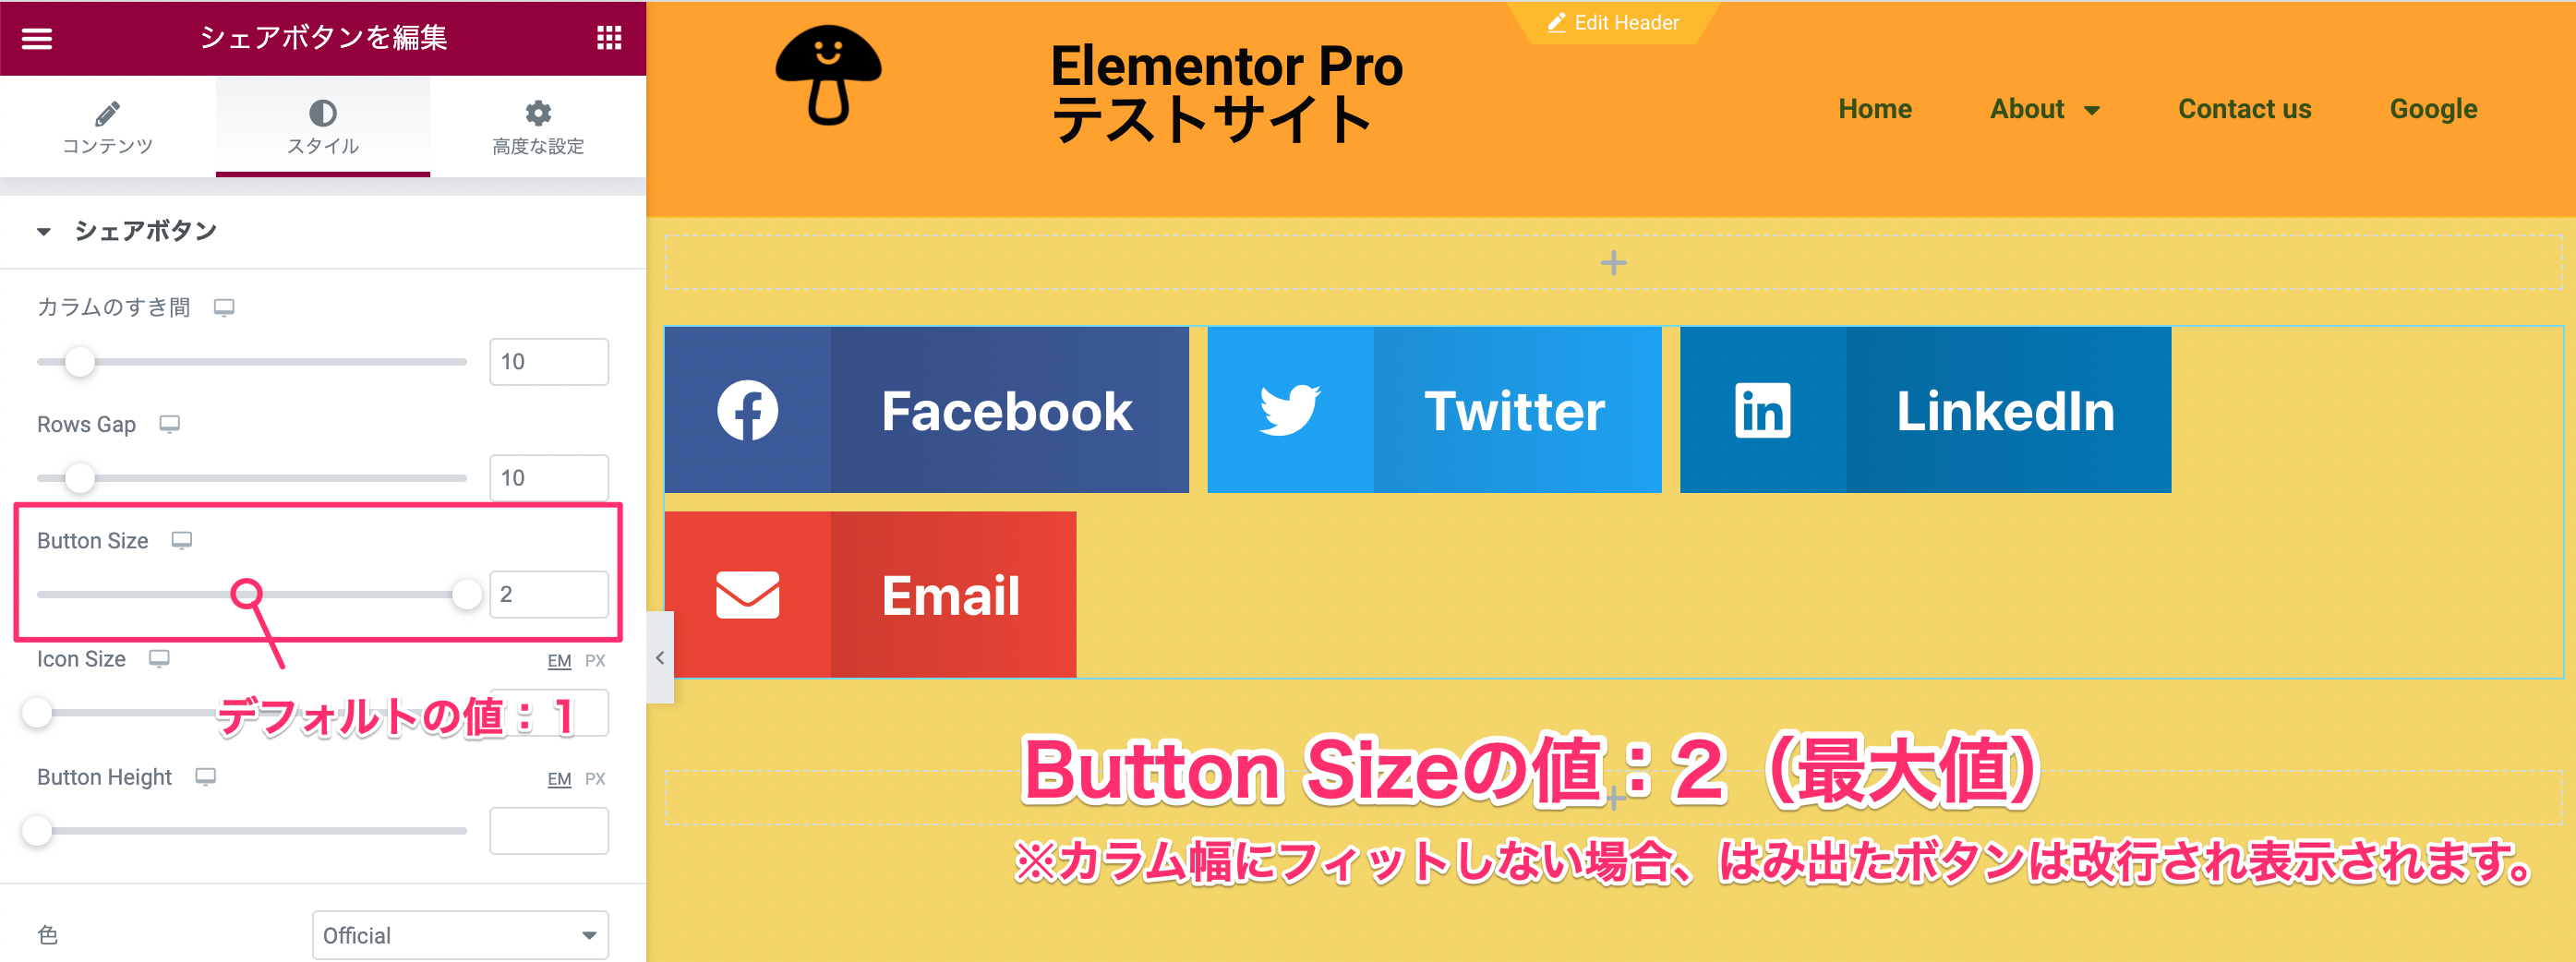 Button Sizeの説明・値を2（最大値）にしたときの表示画面